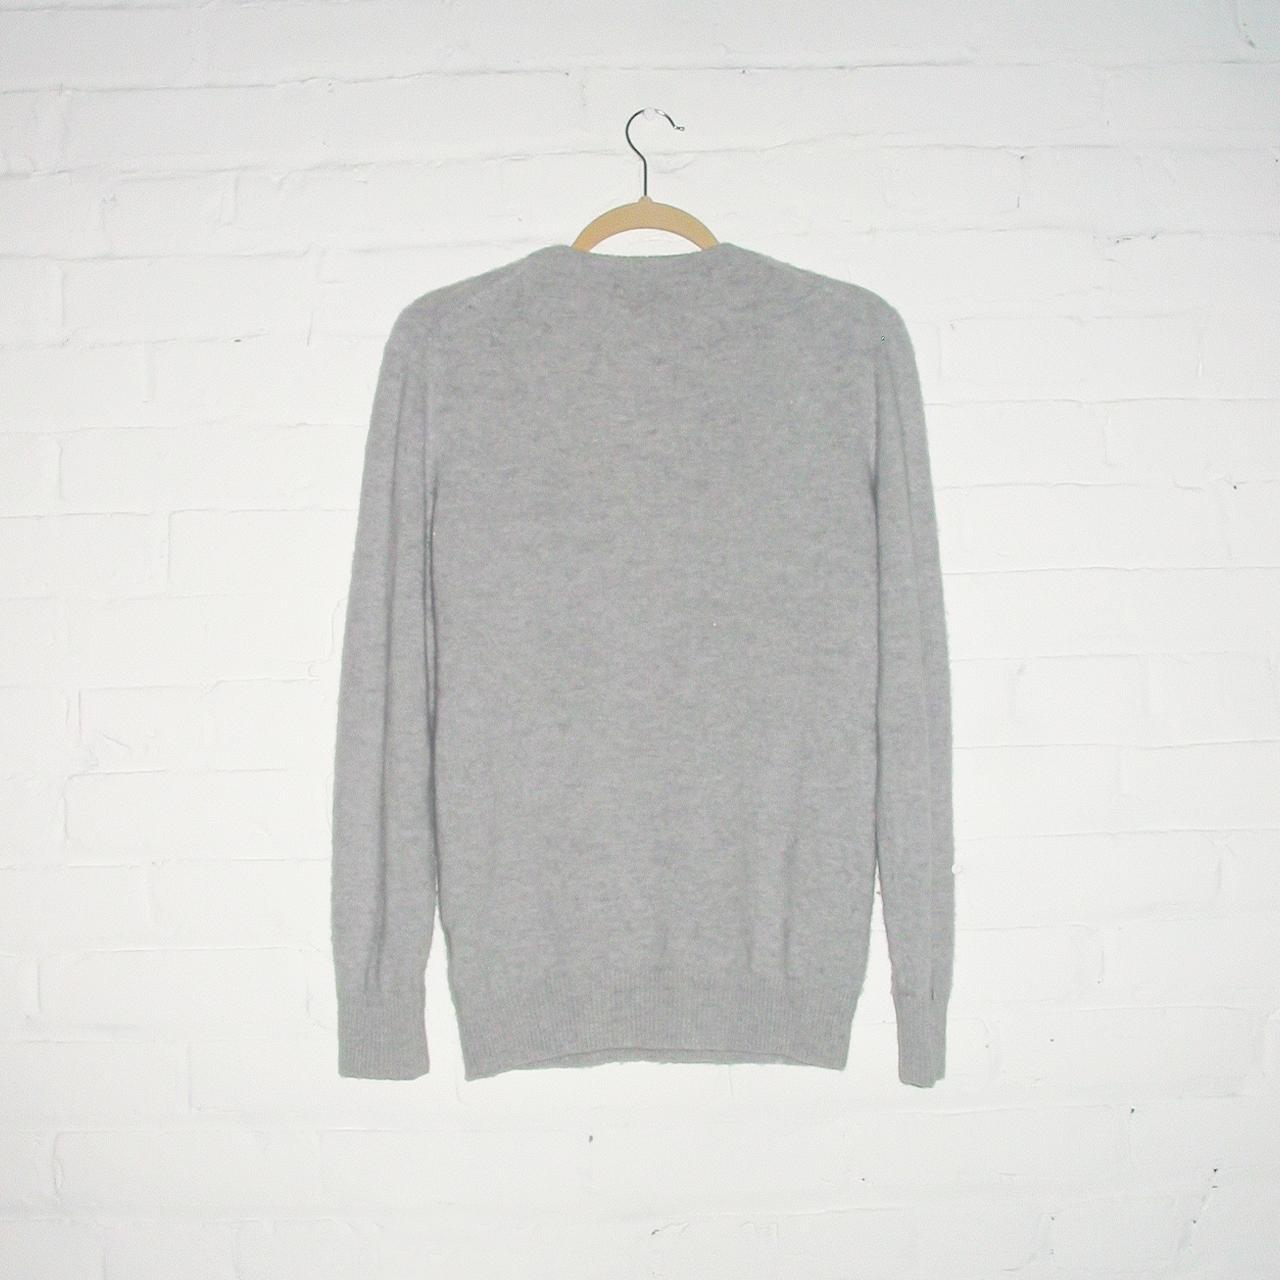 Product Image 2 - The Upcycled Cashmere.

The Cashmere came